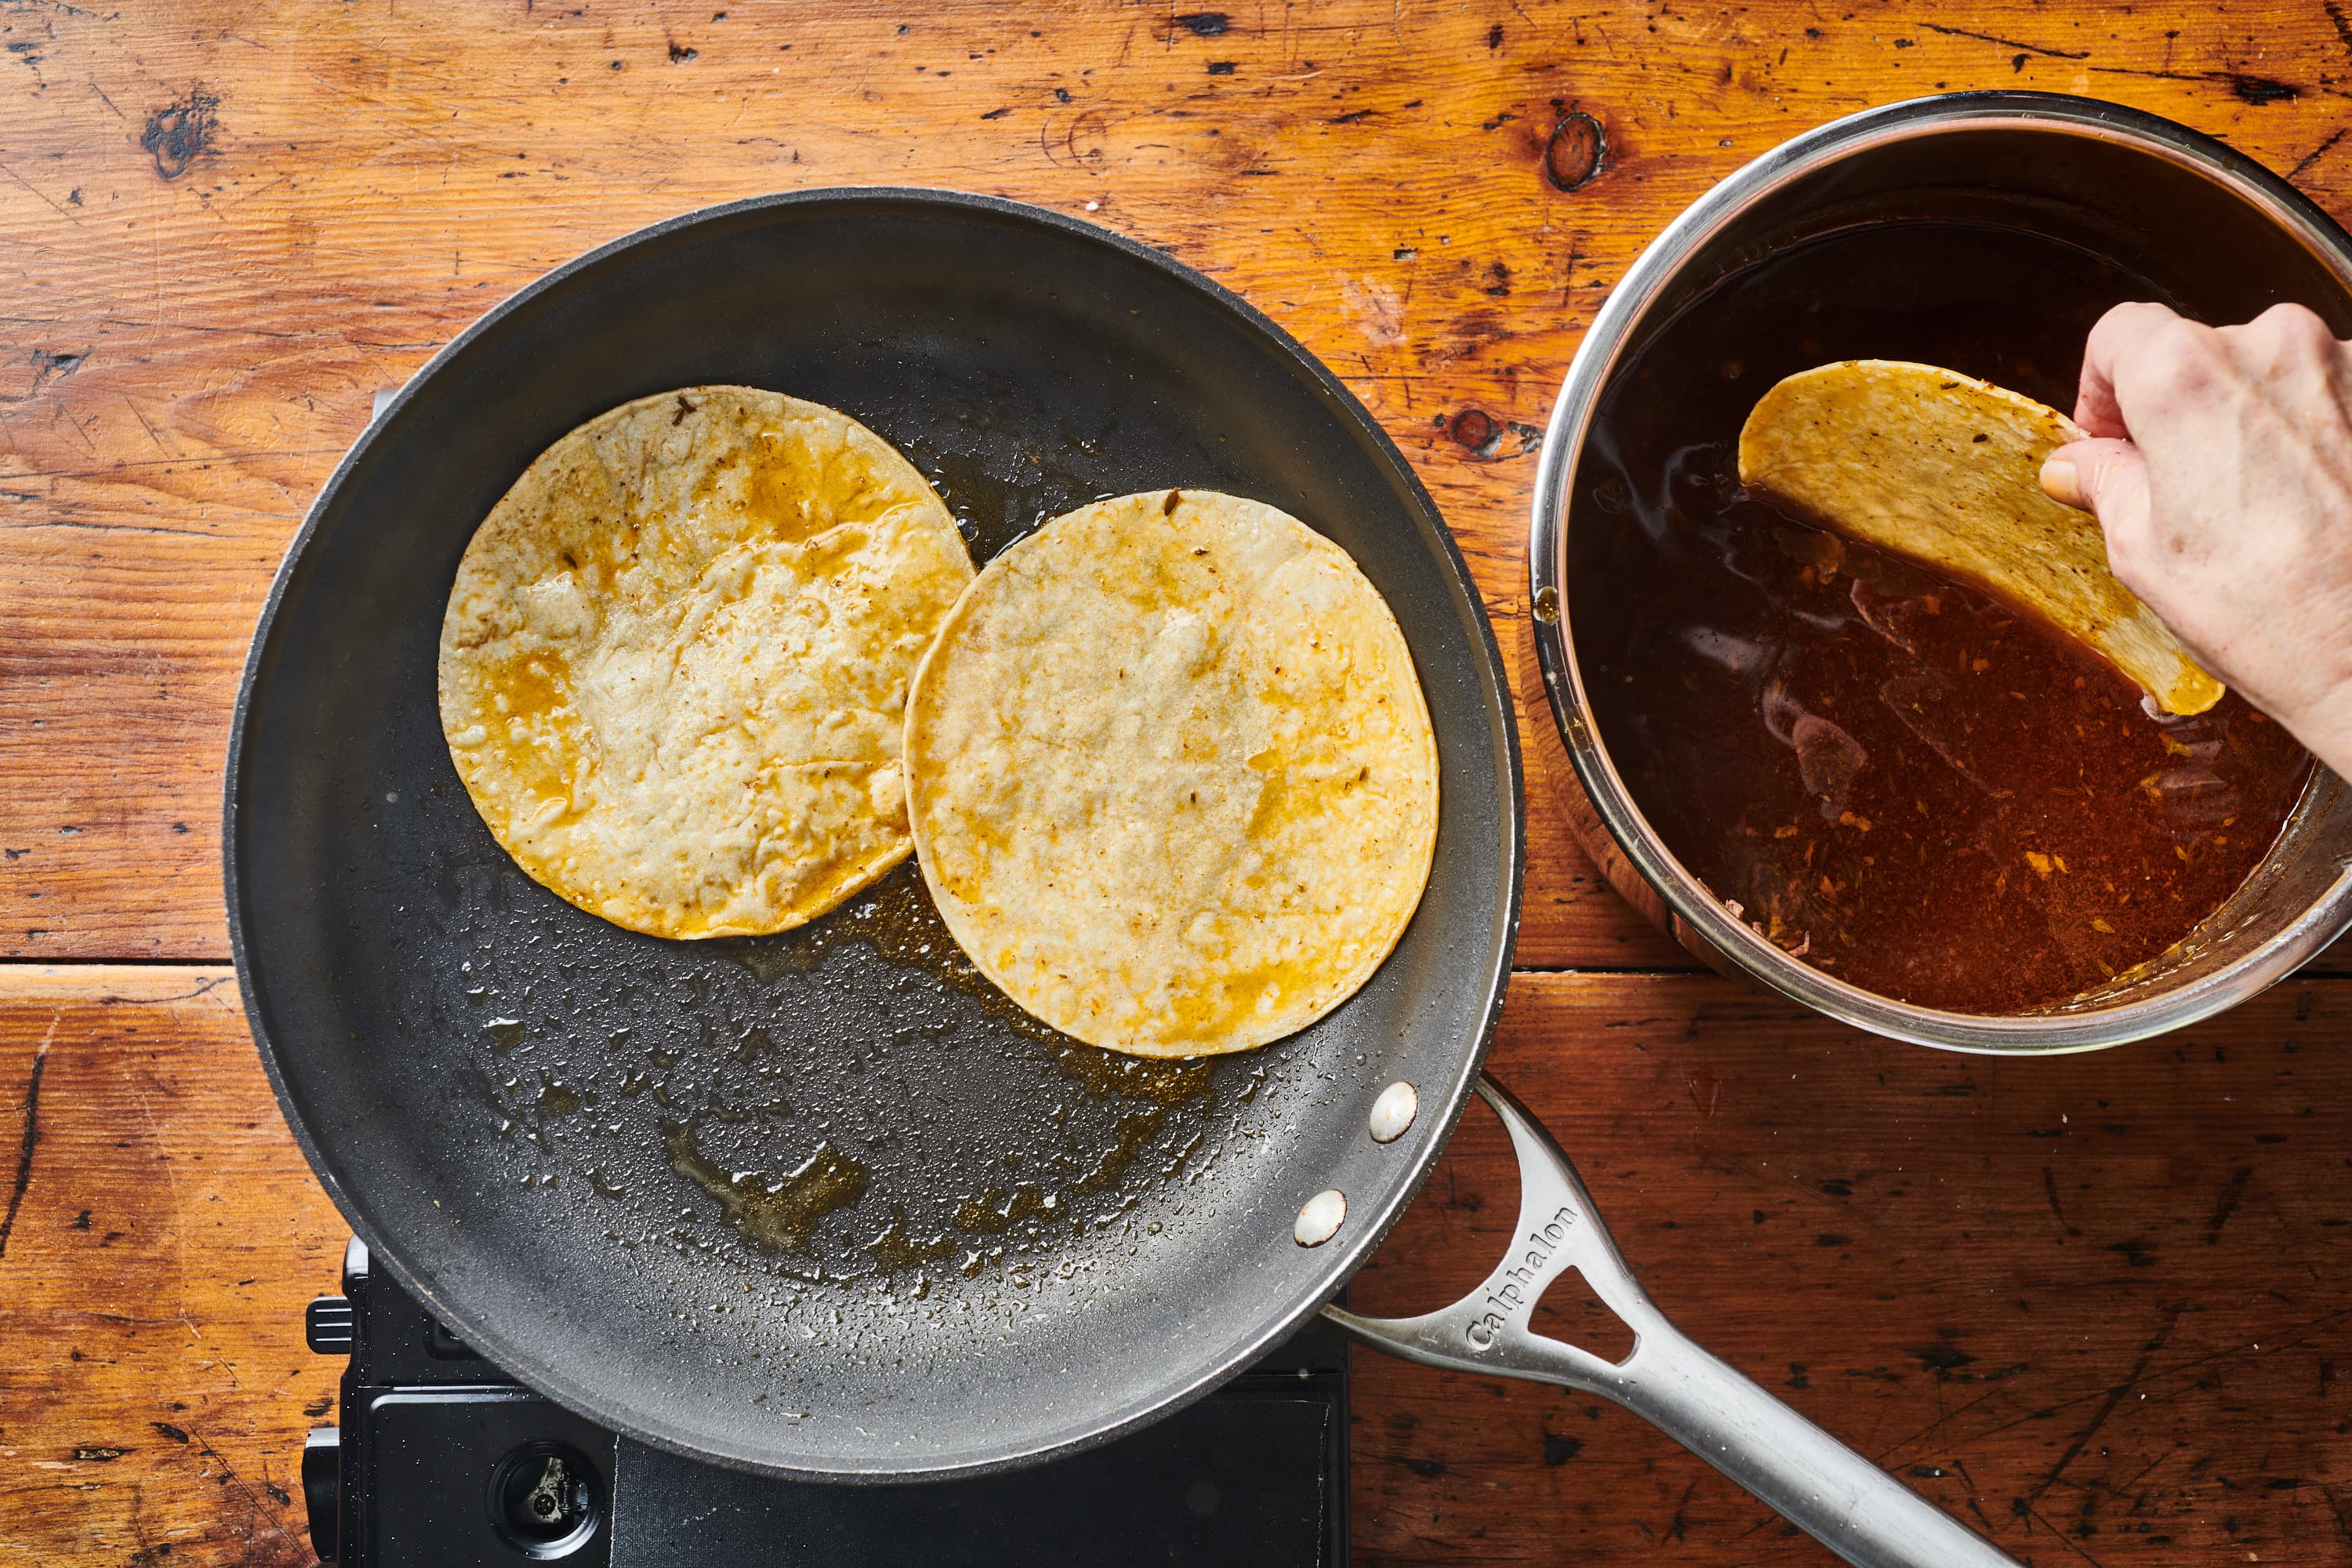 How to make consomme for tacos